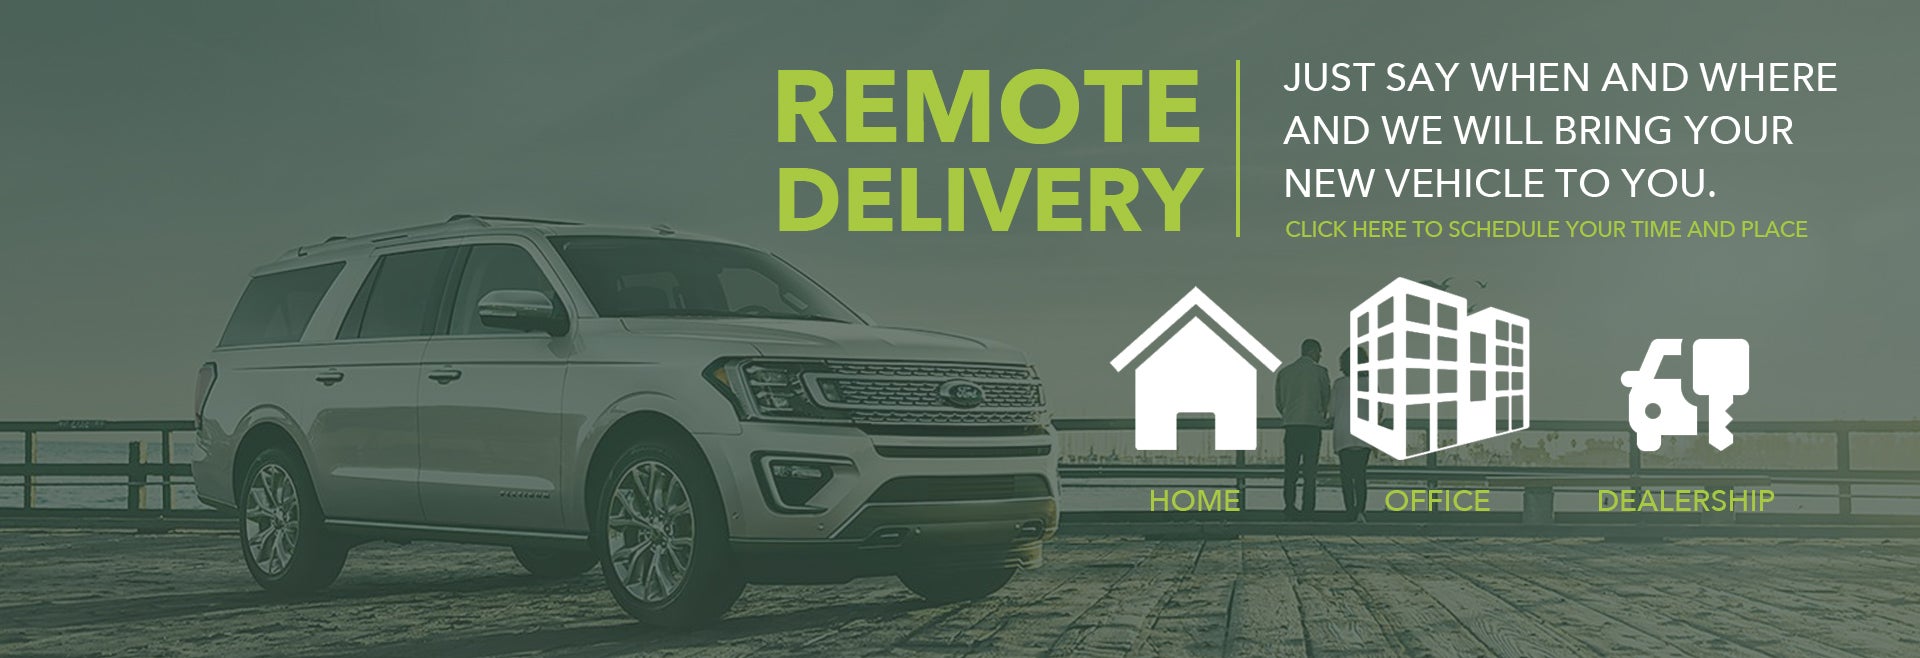 Remote Delivery Banner